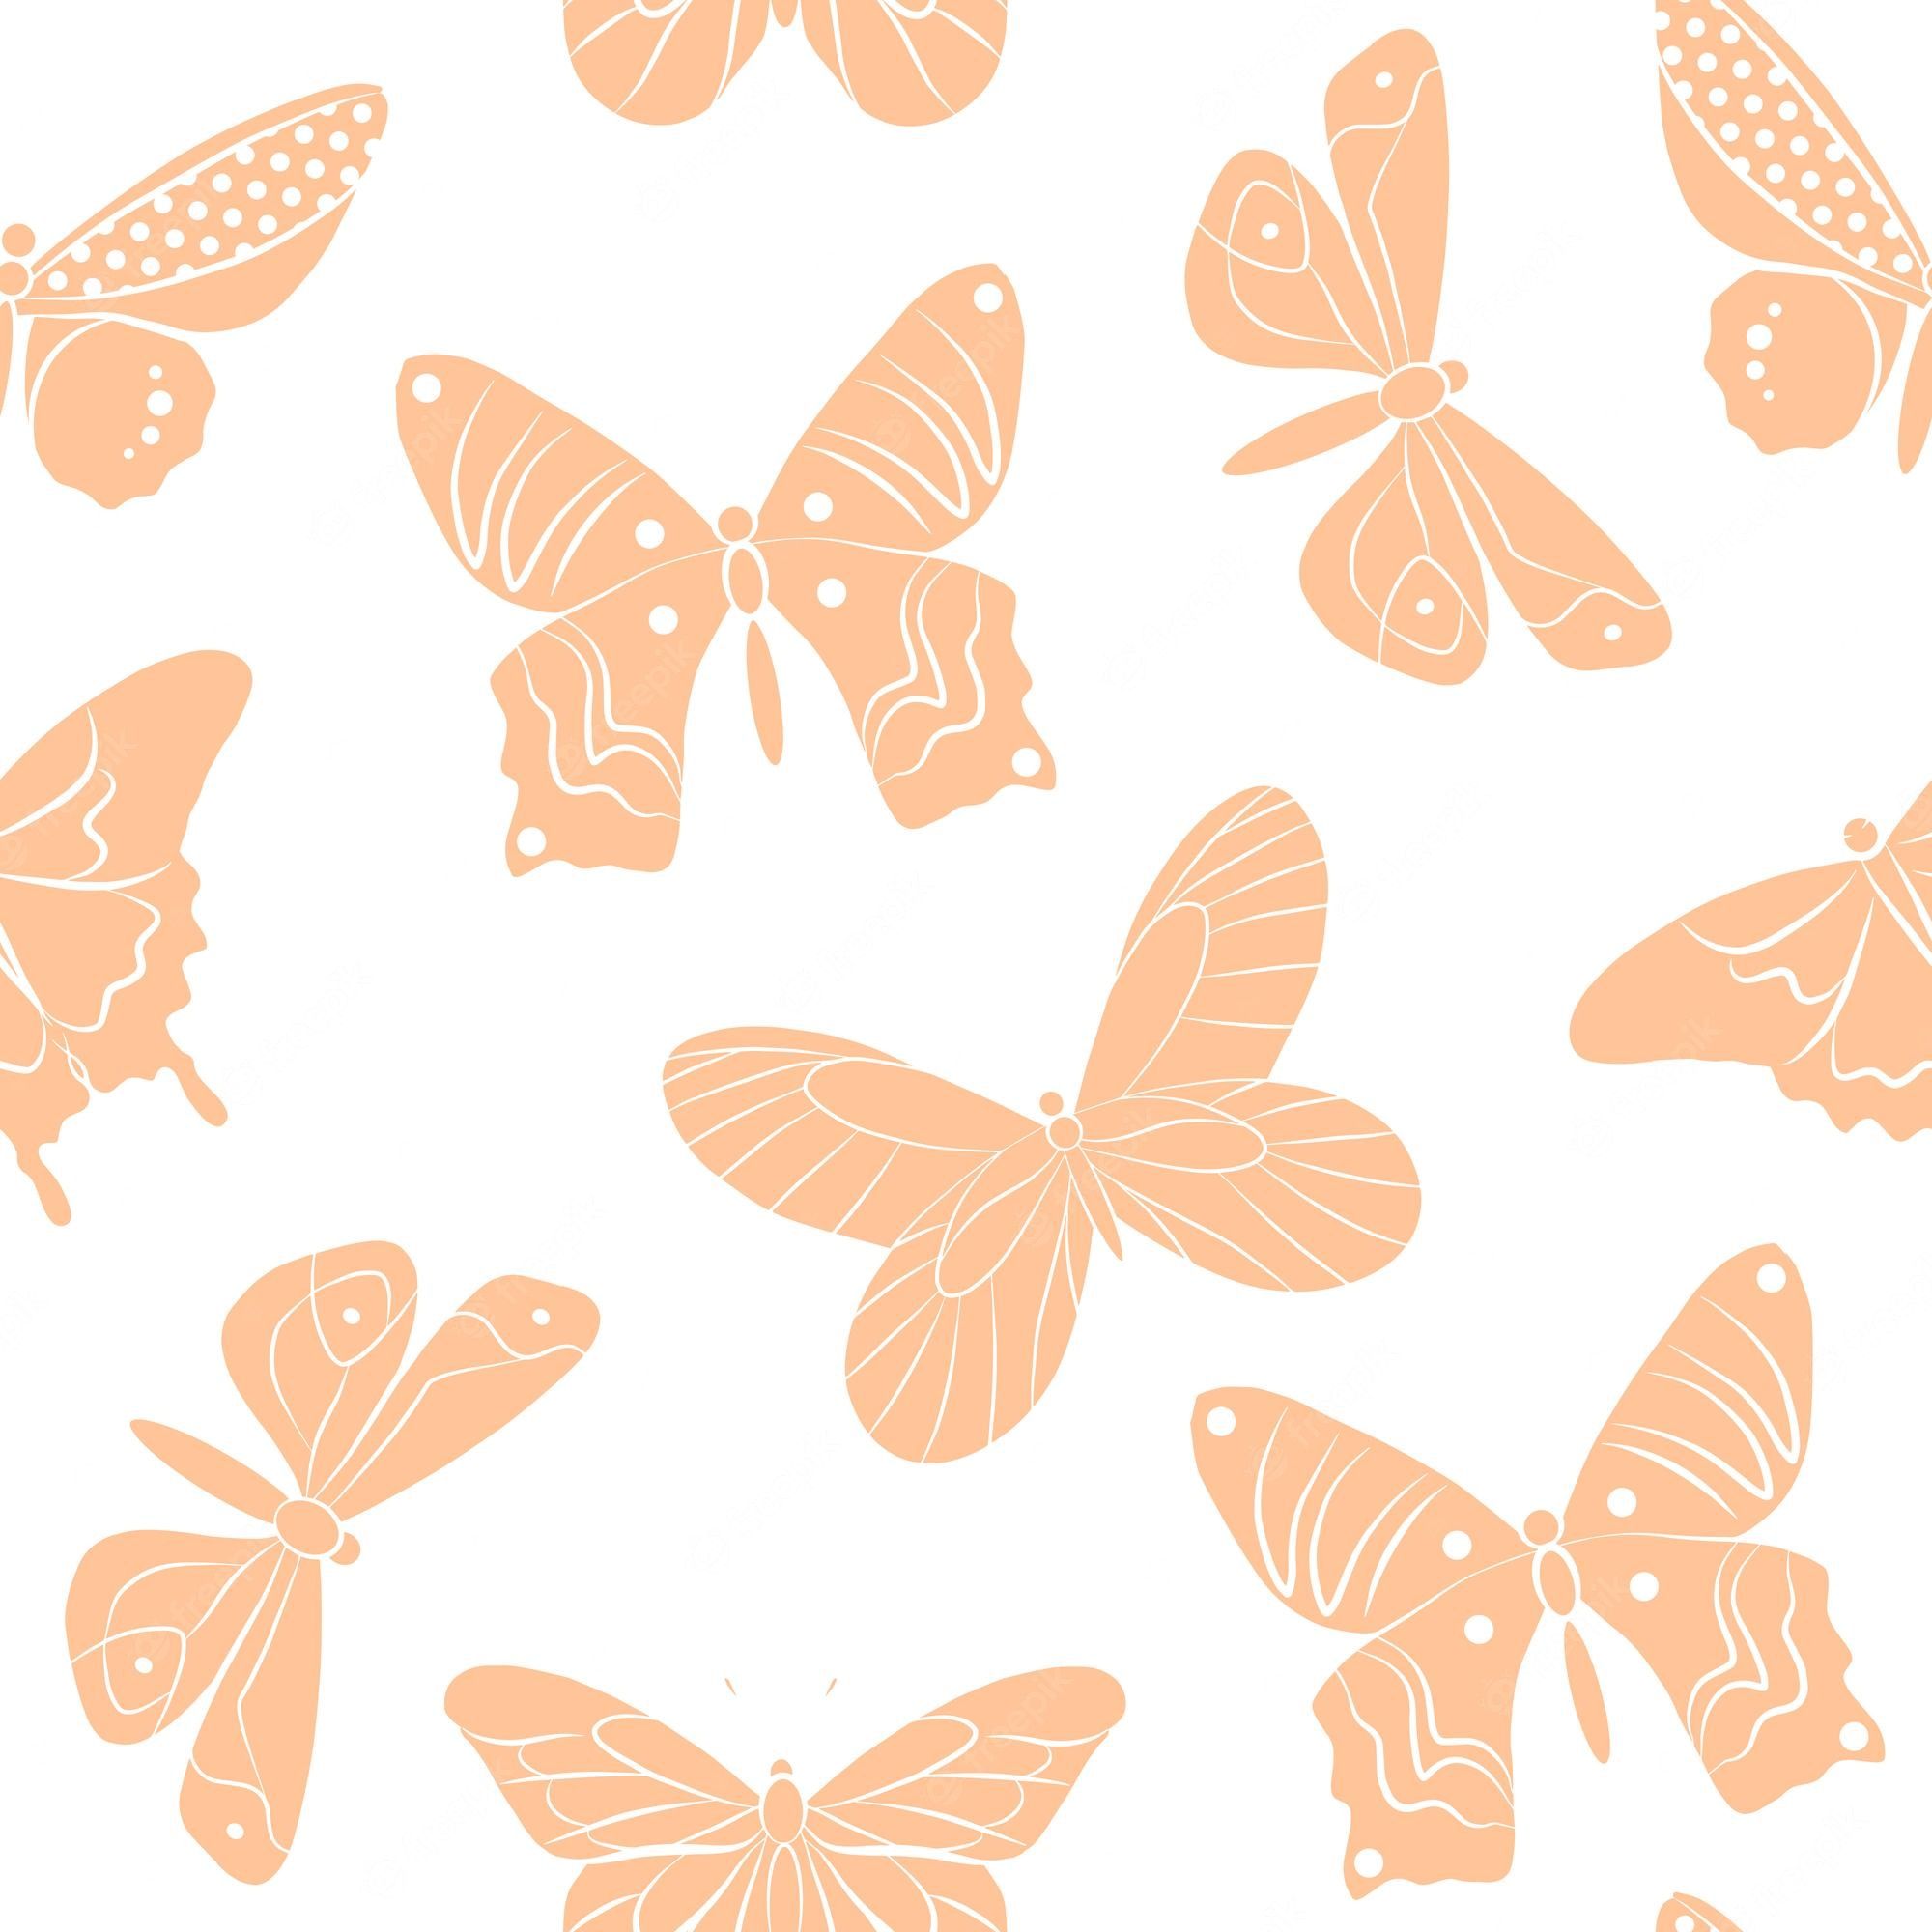 Premium Vector. Butterfly insect isolated vector illustration pale pastel orange seamless pattern simple graphic outline drawing doodle fly animal icon set nursery wallpaper design